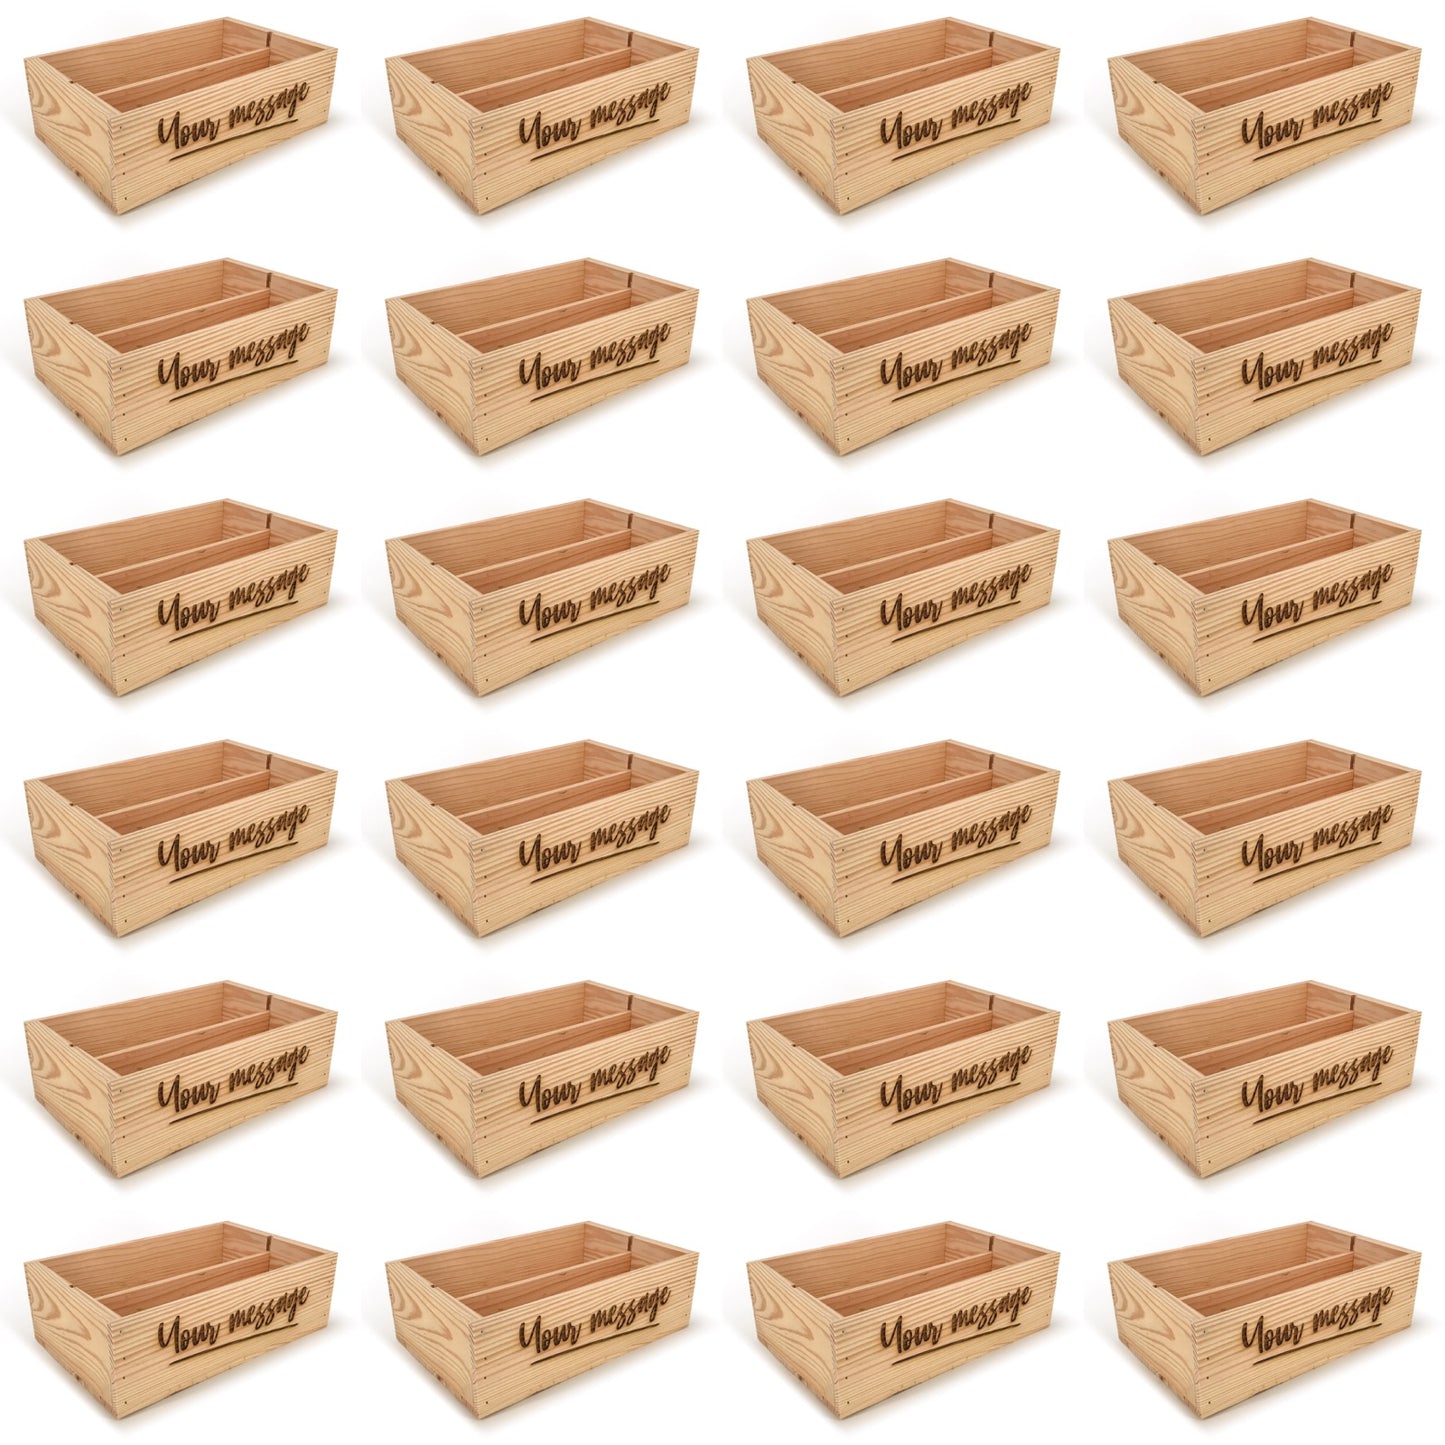 24 Two Bottle Wine Crate Boxes with Custom Message 14x9x4.5, 6-WB-14-9-4.5-ST-NW-NL,  12-WB-14-9-4.5-ST-NW-NL,  24-WB-14-9-4.5-ST-NW-NL,  48-WB-14-9-4.5-ST-NW-NL,  96-WB-14-9-4.5-ST-NW-NL